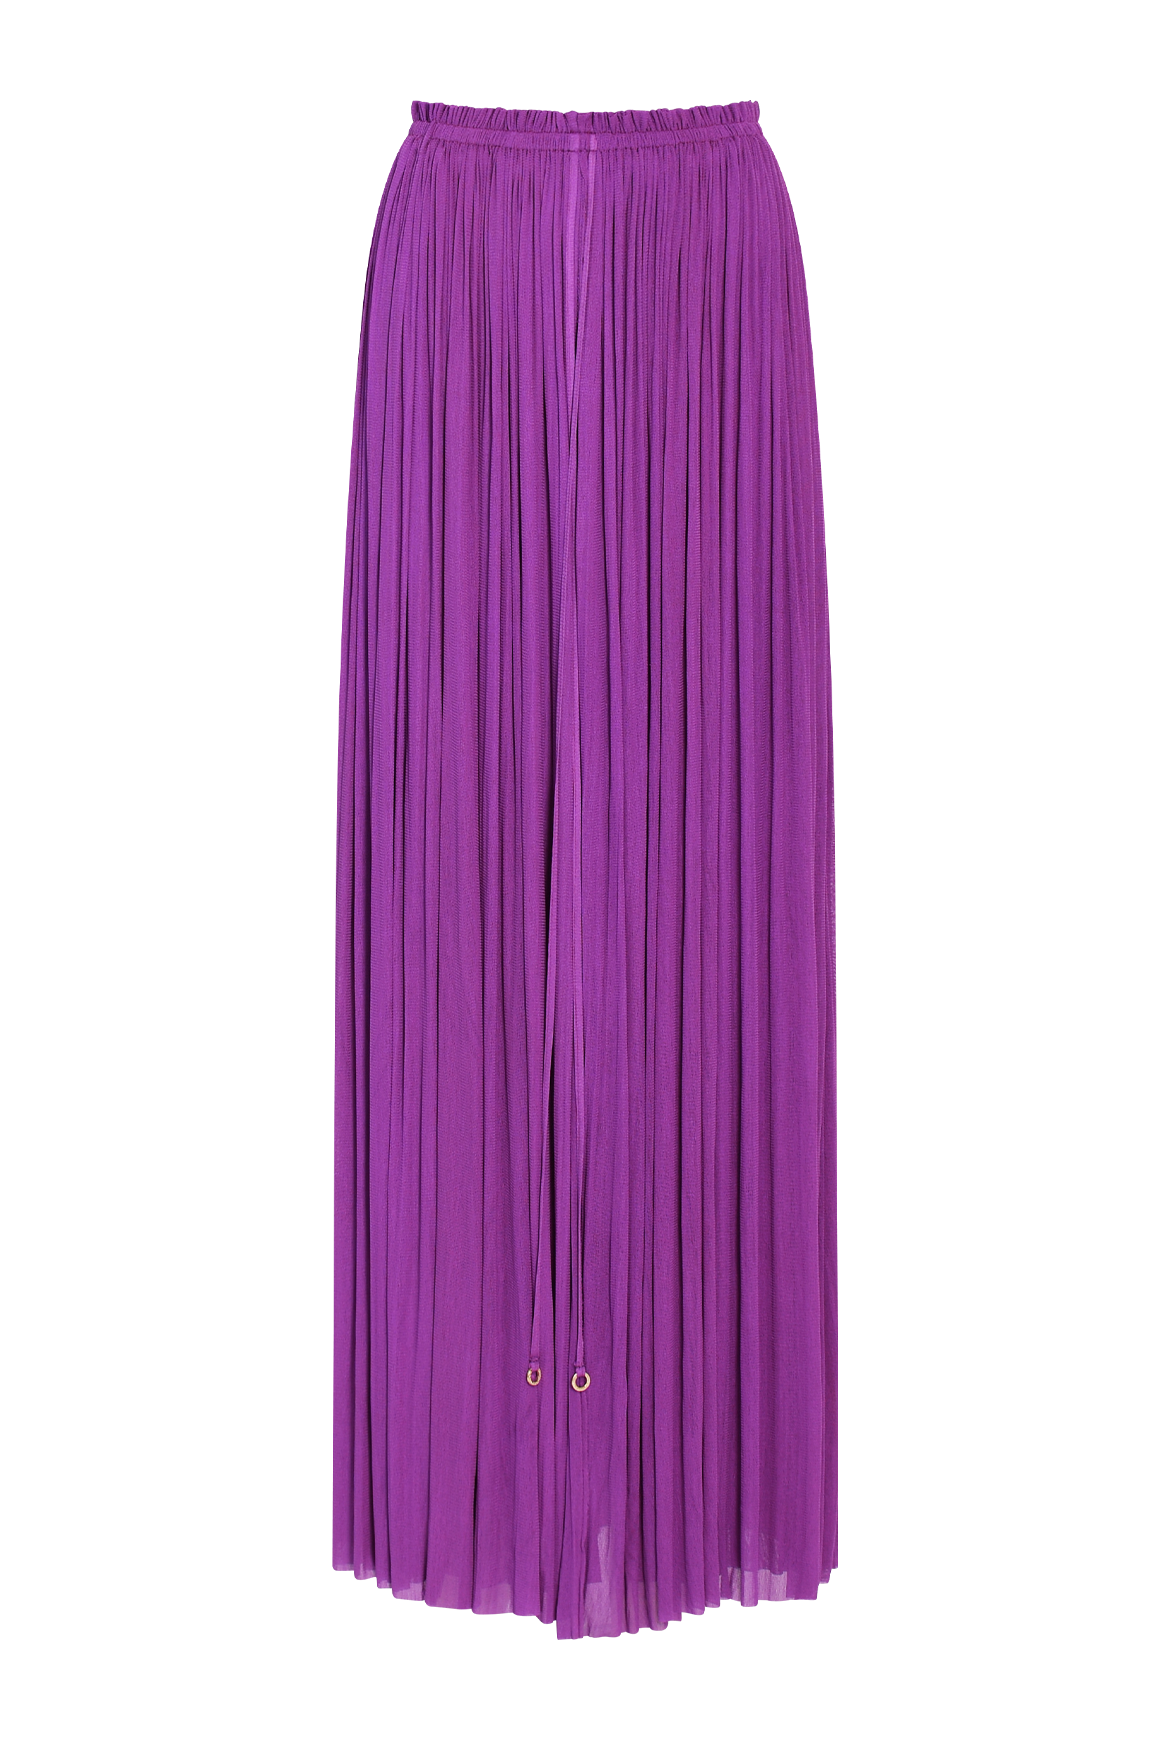 Product photo of Silk Tulle Long Skirt perfect for resort, party & wedding.